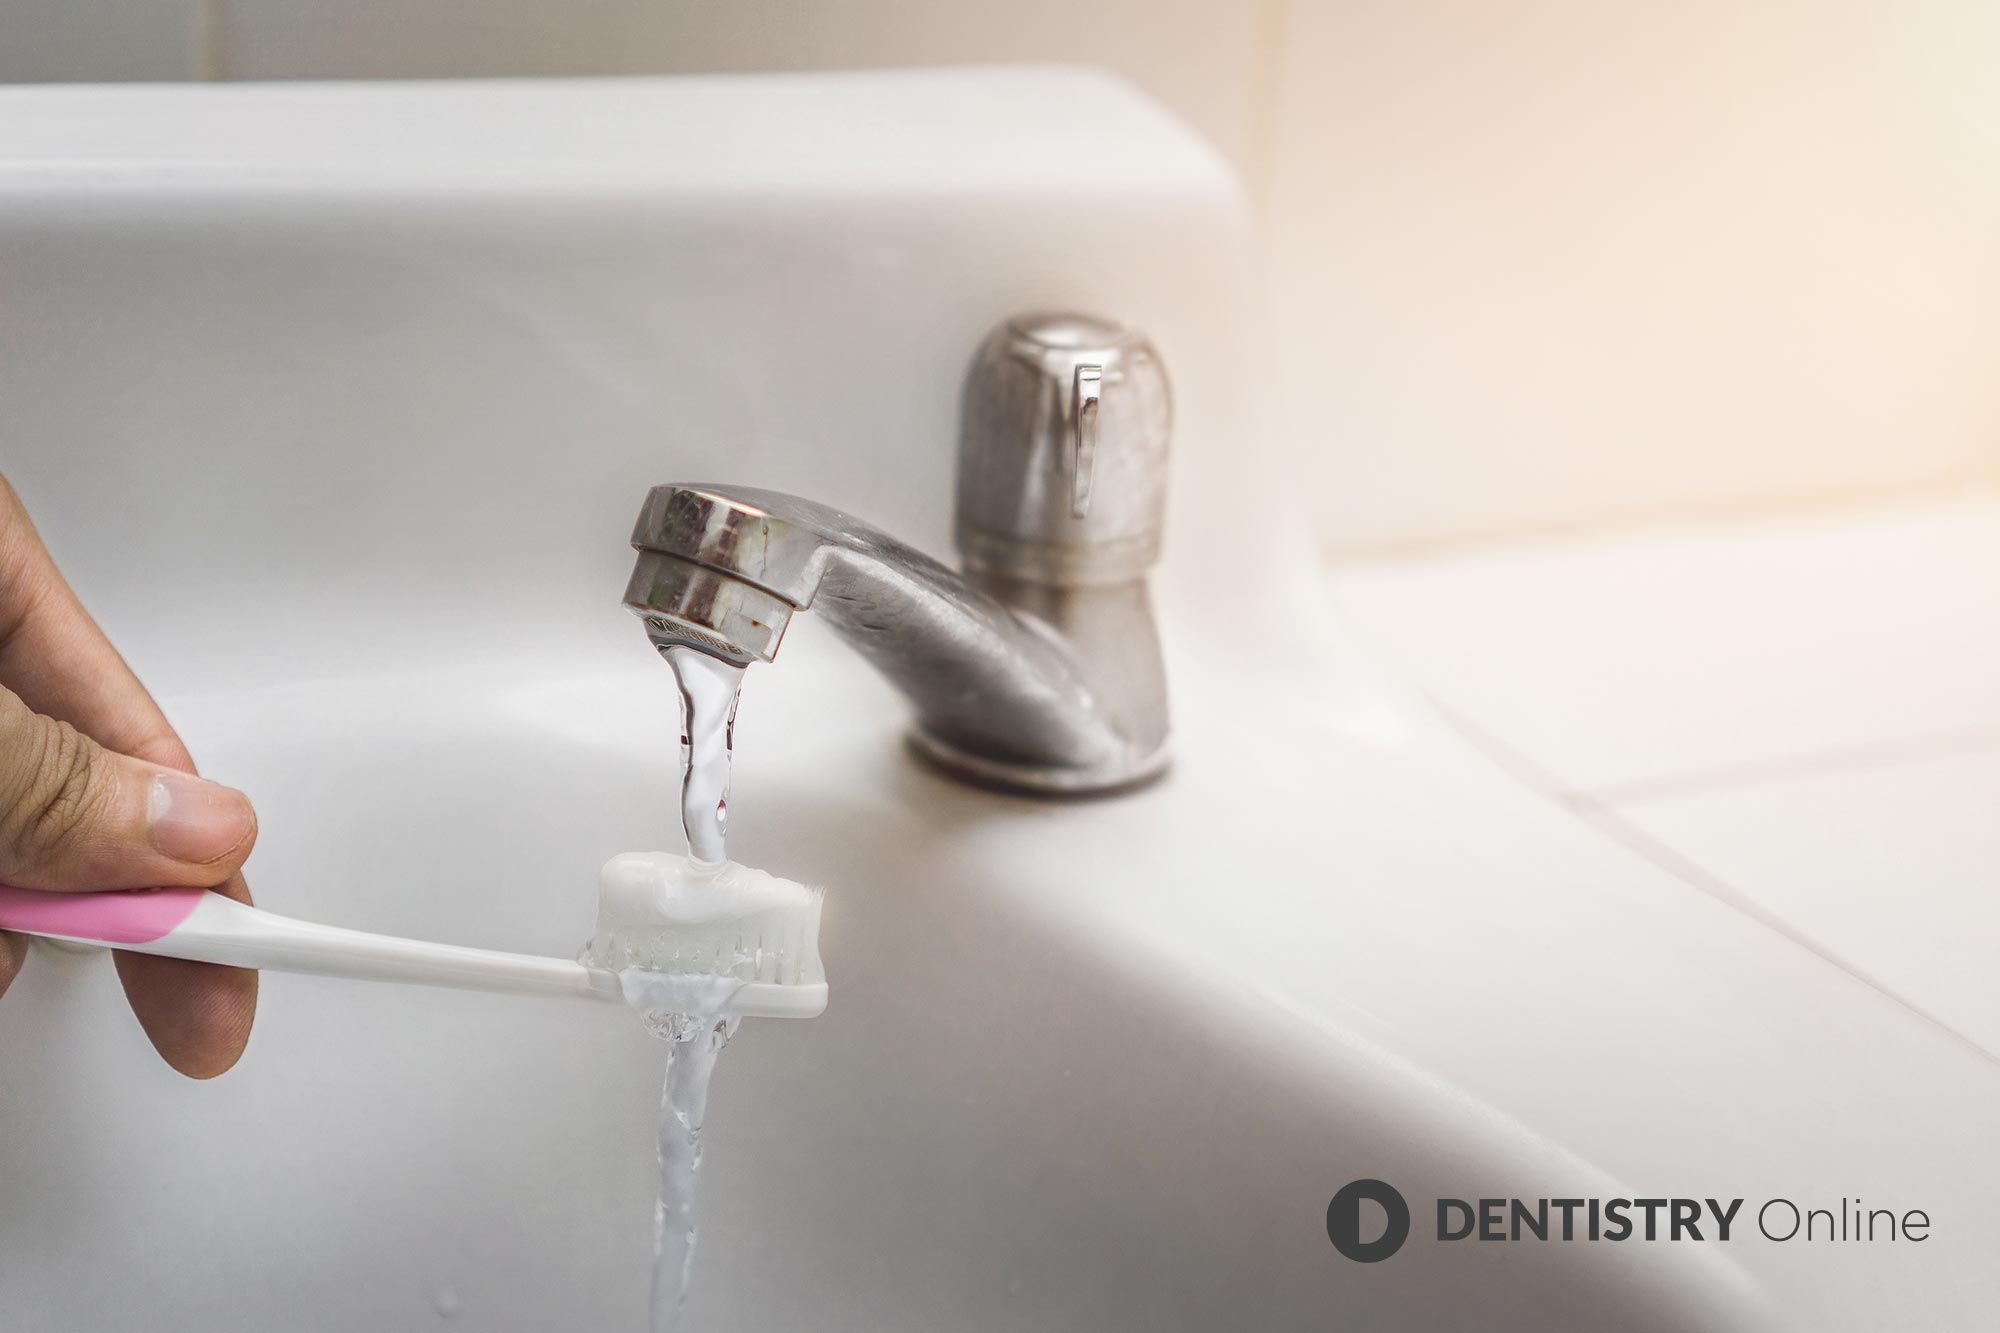 New plans for water fluoridation – reaction from the profession